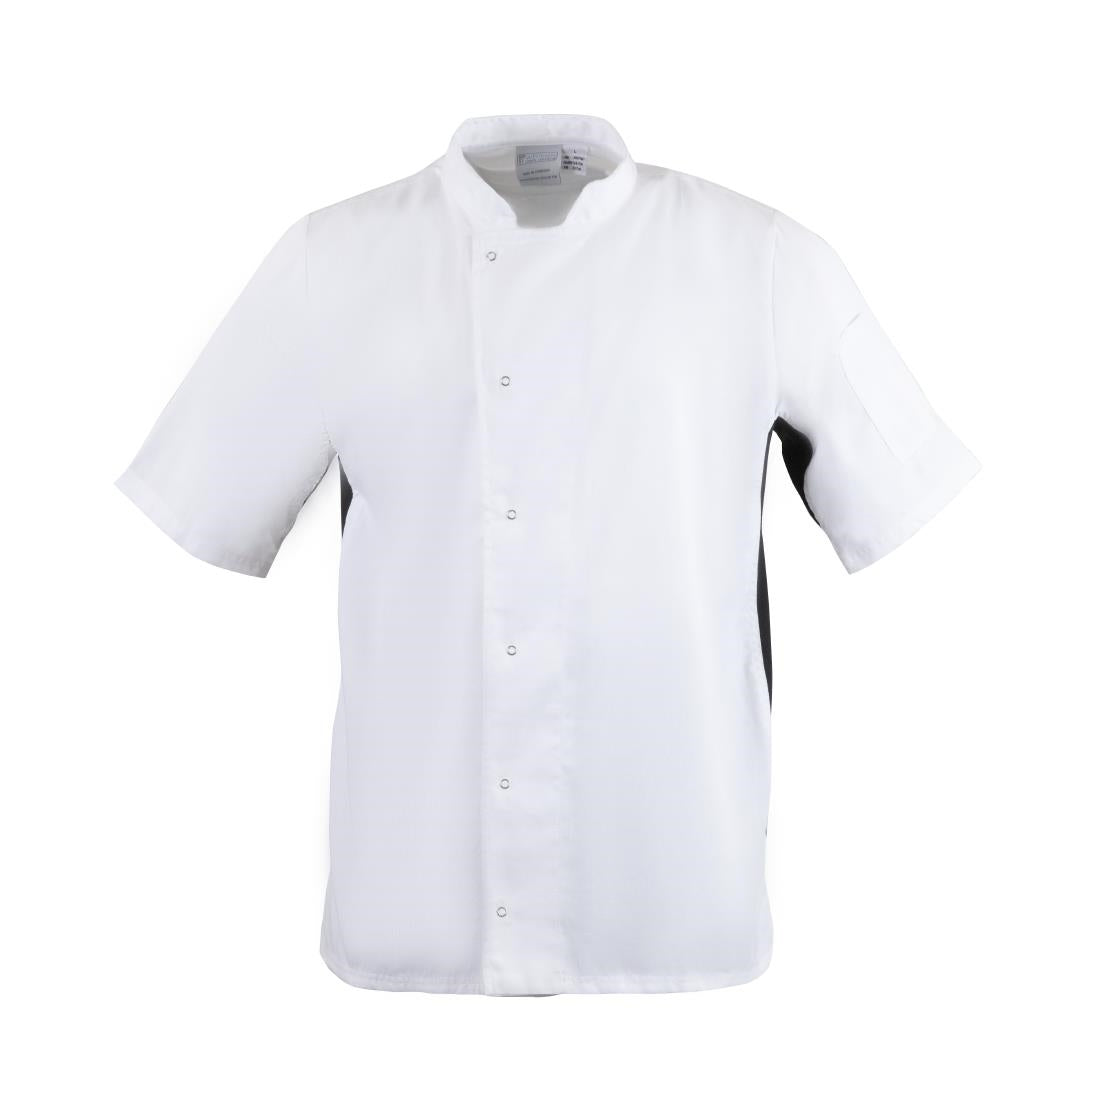 A928-M Whites Nevada Unisex Chefs Jacket Short Sleeve Black and White M JD Catering Equipment Solutions Ltd